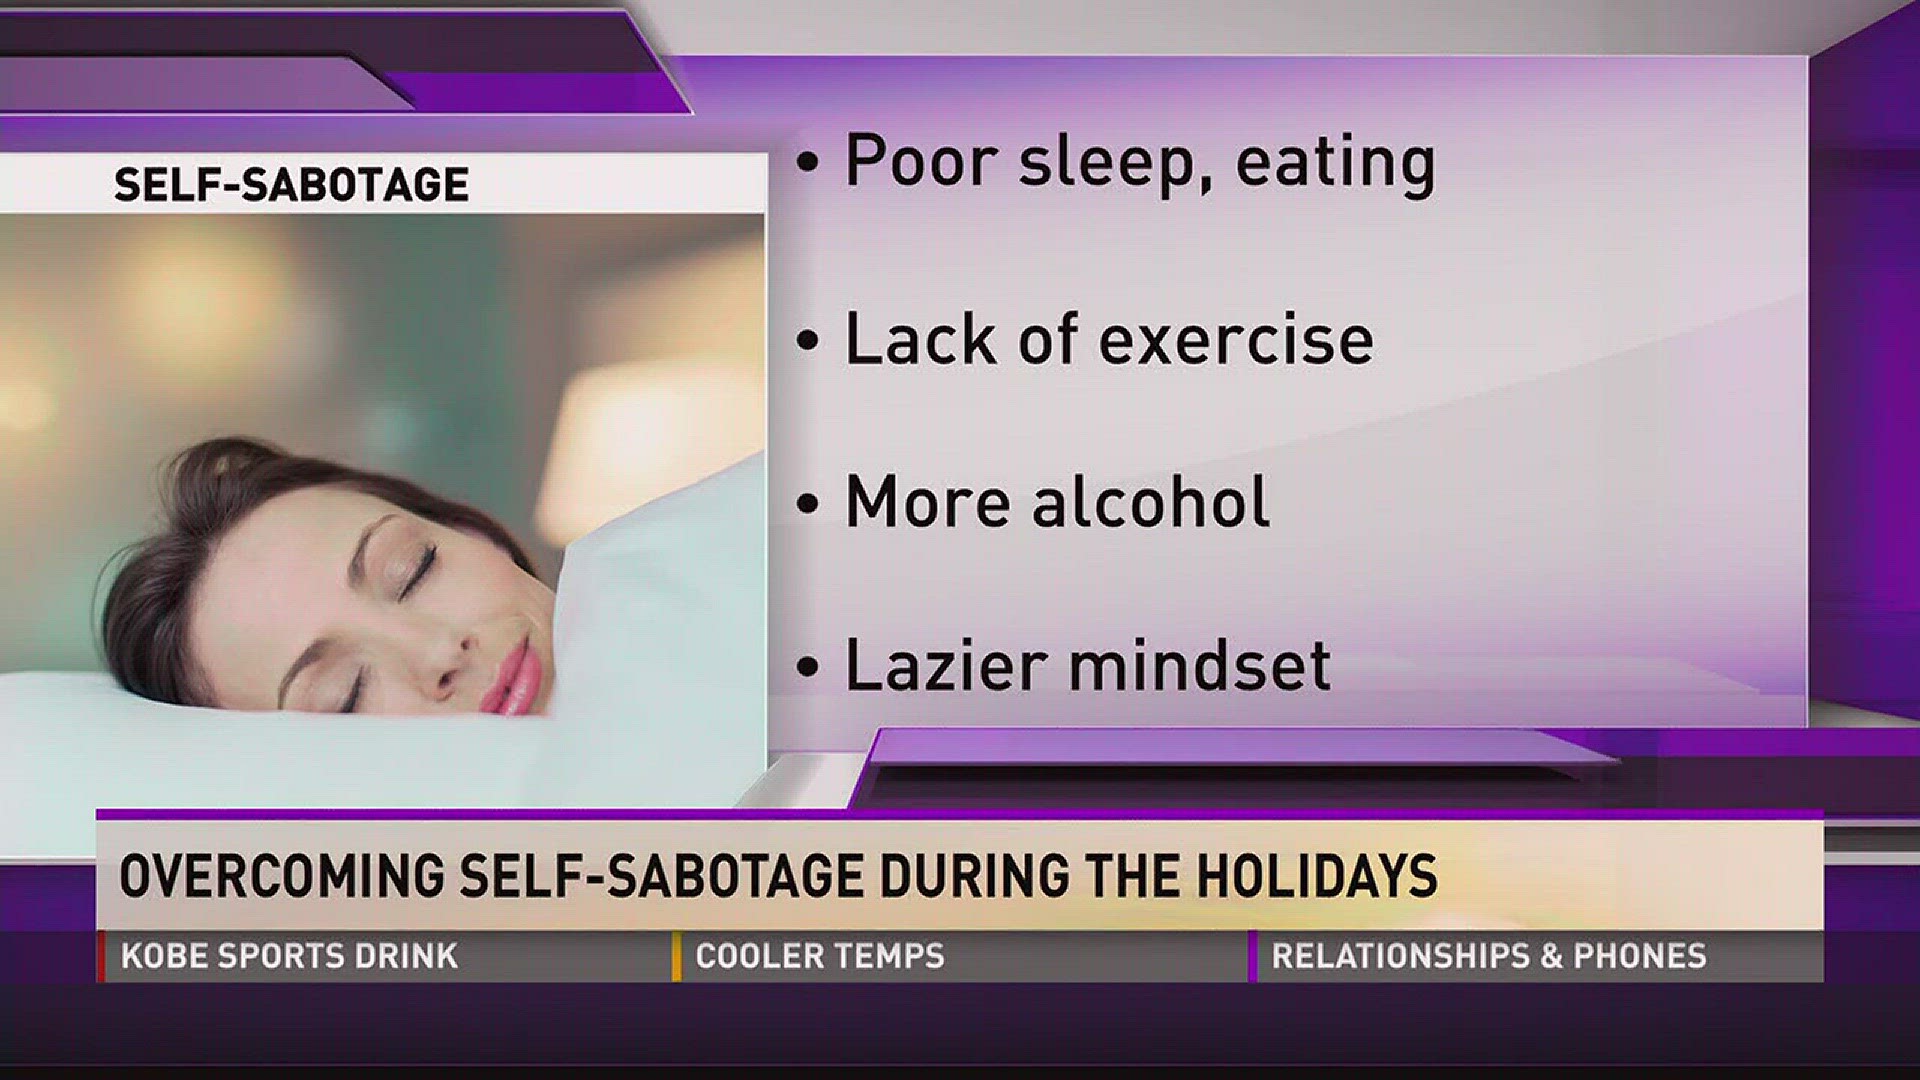 Overcoming Self-Sabotage During the Holidays